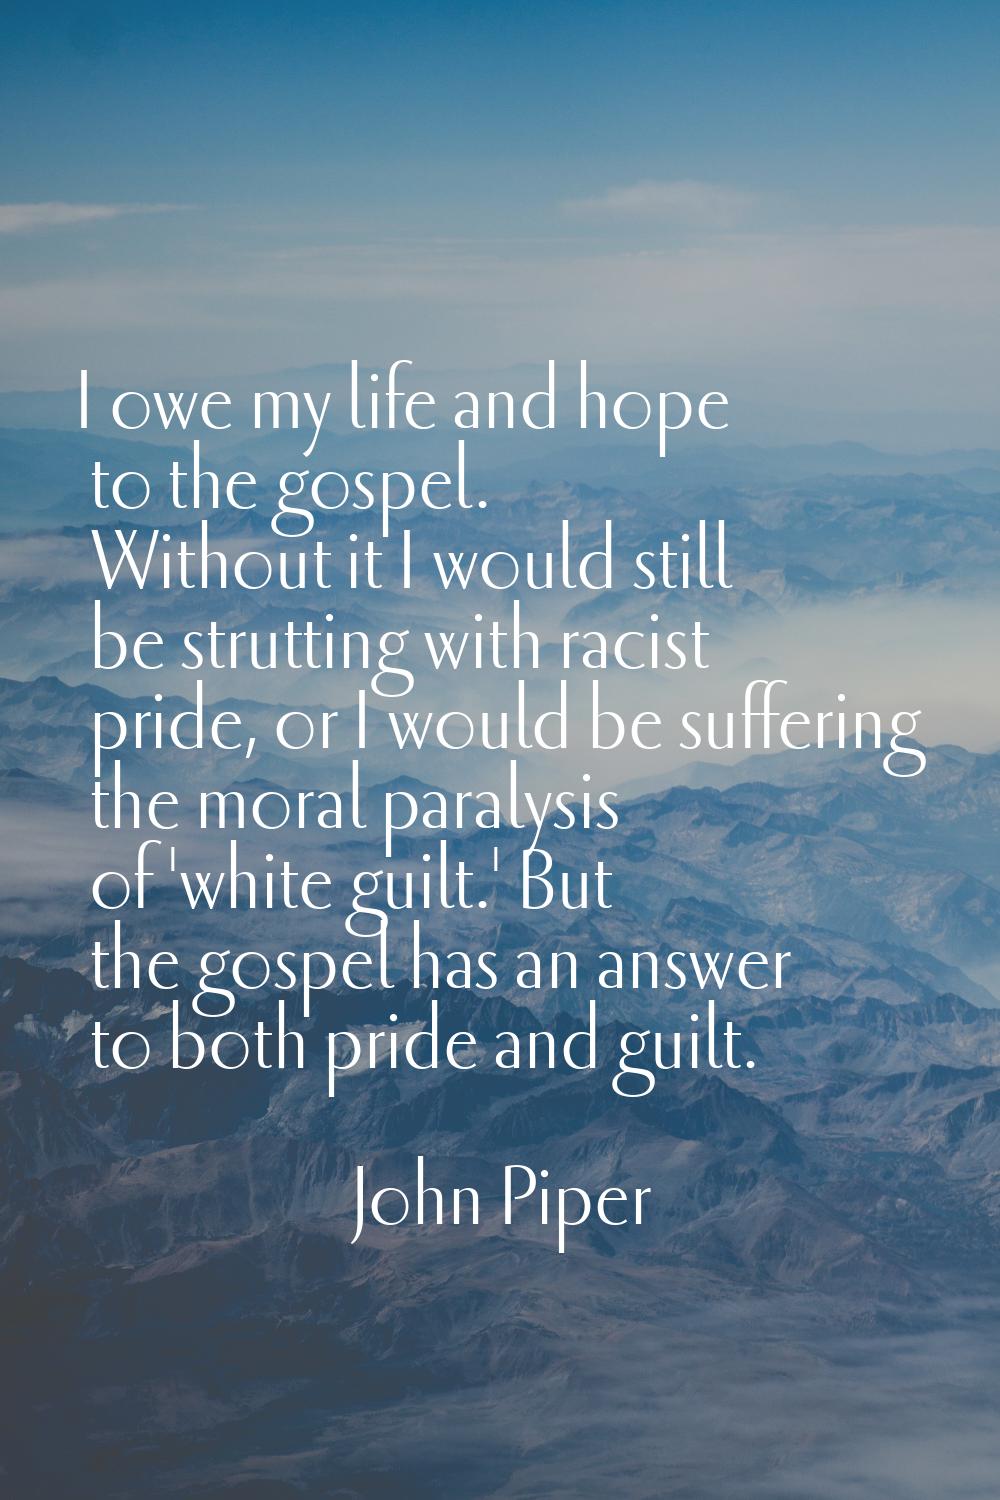 I owe my life and hope to the gospel. Without it I would still be strutting with racist pride, or I